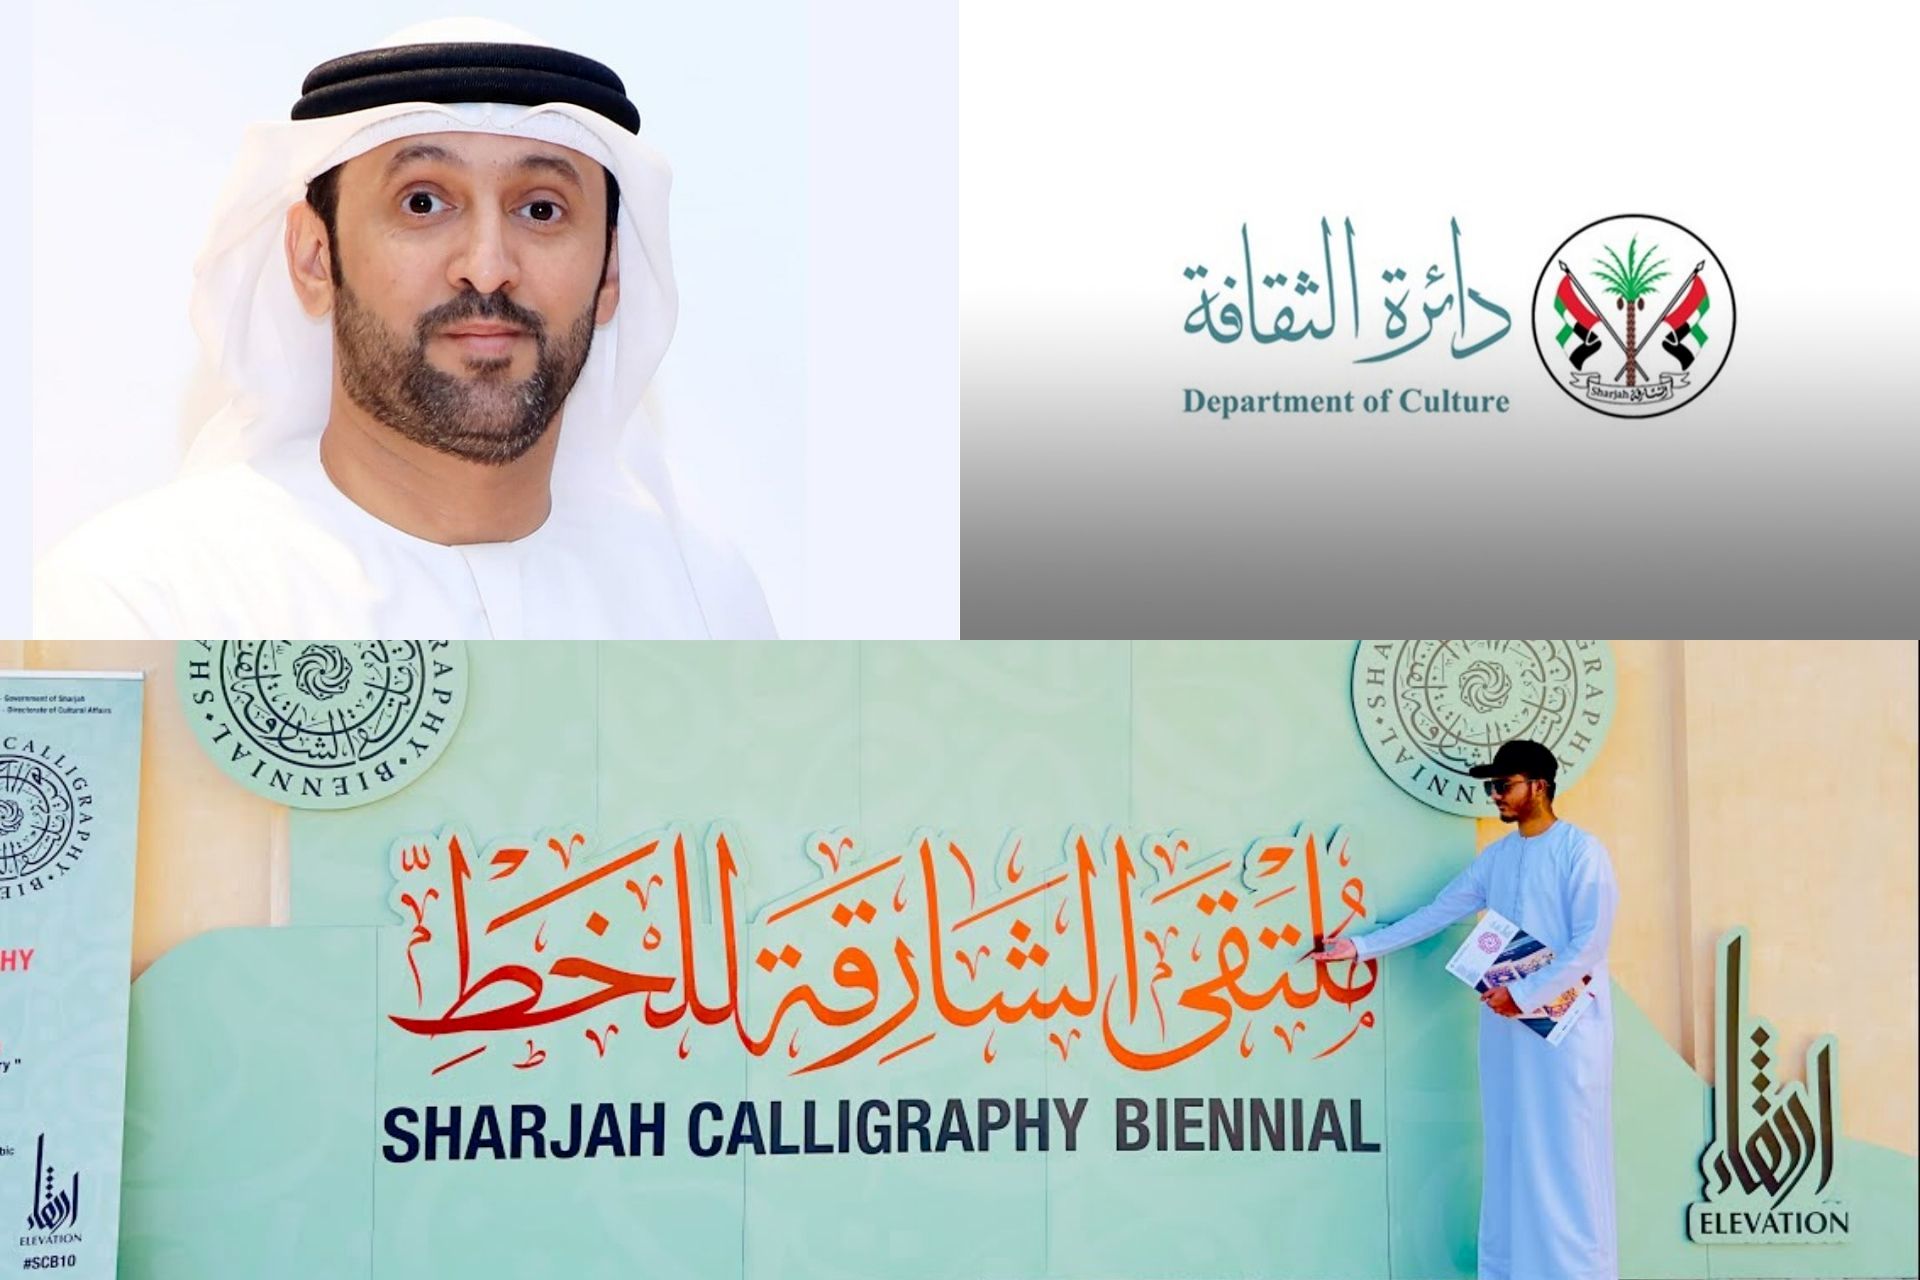 The 11th Sharjah Calligraphy Biennial will be held in October